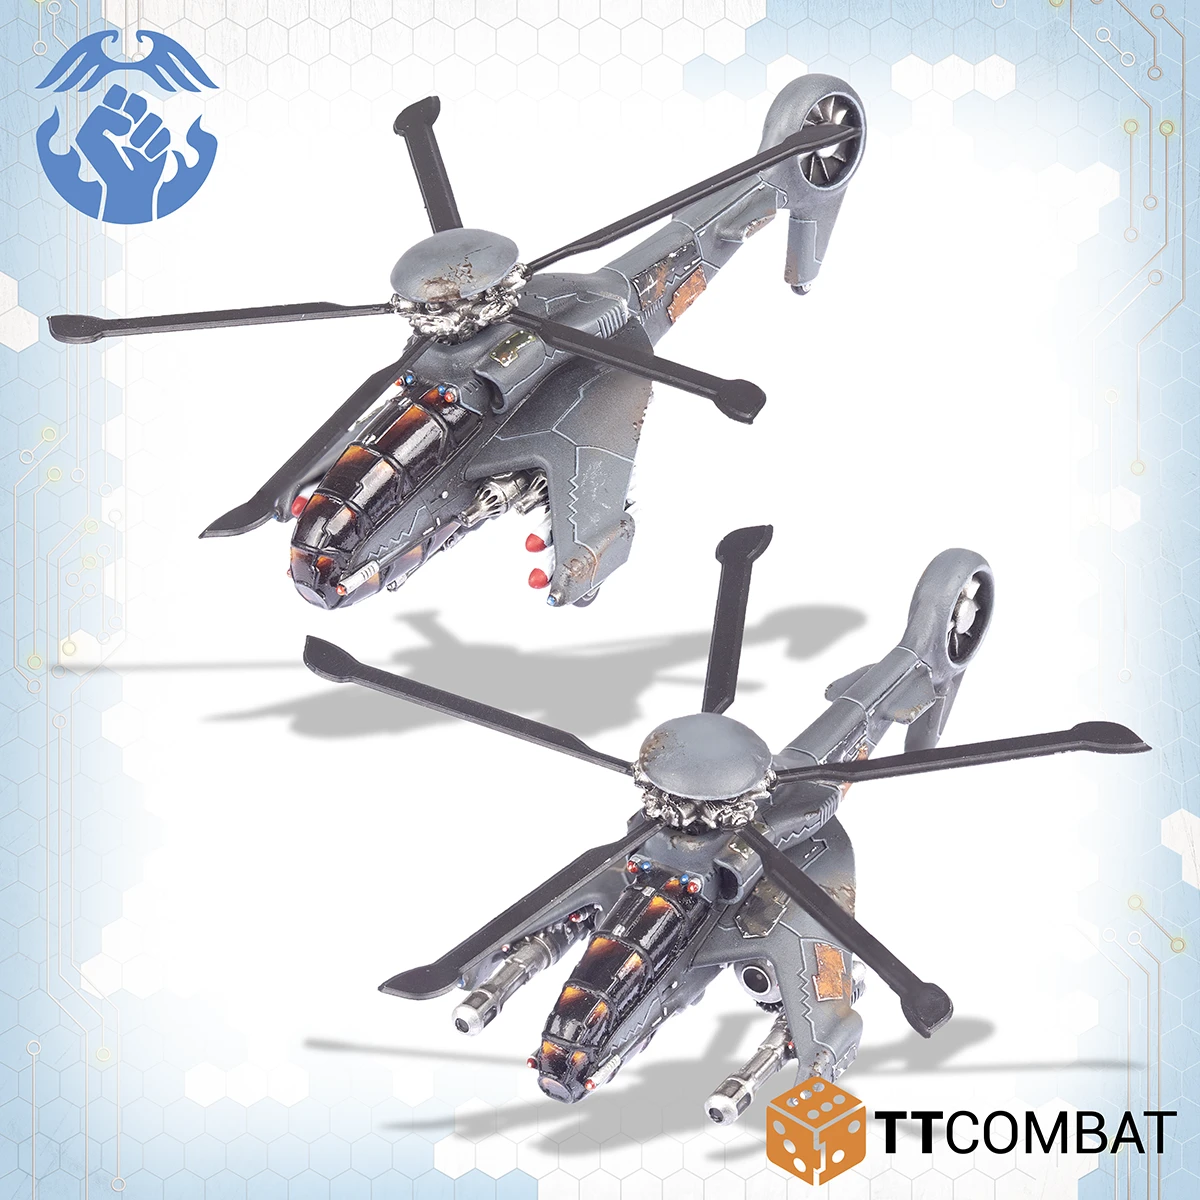 Models of Cyclone attack copters